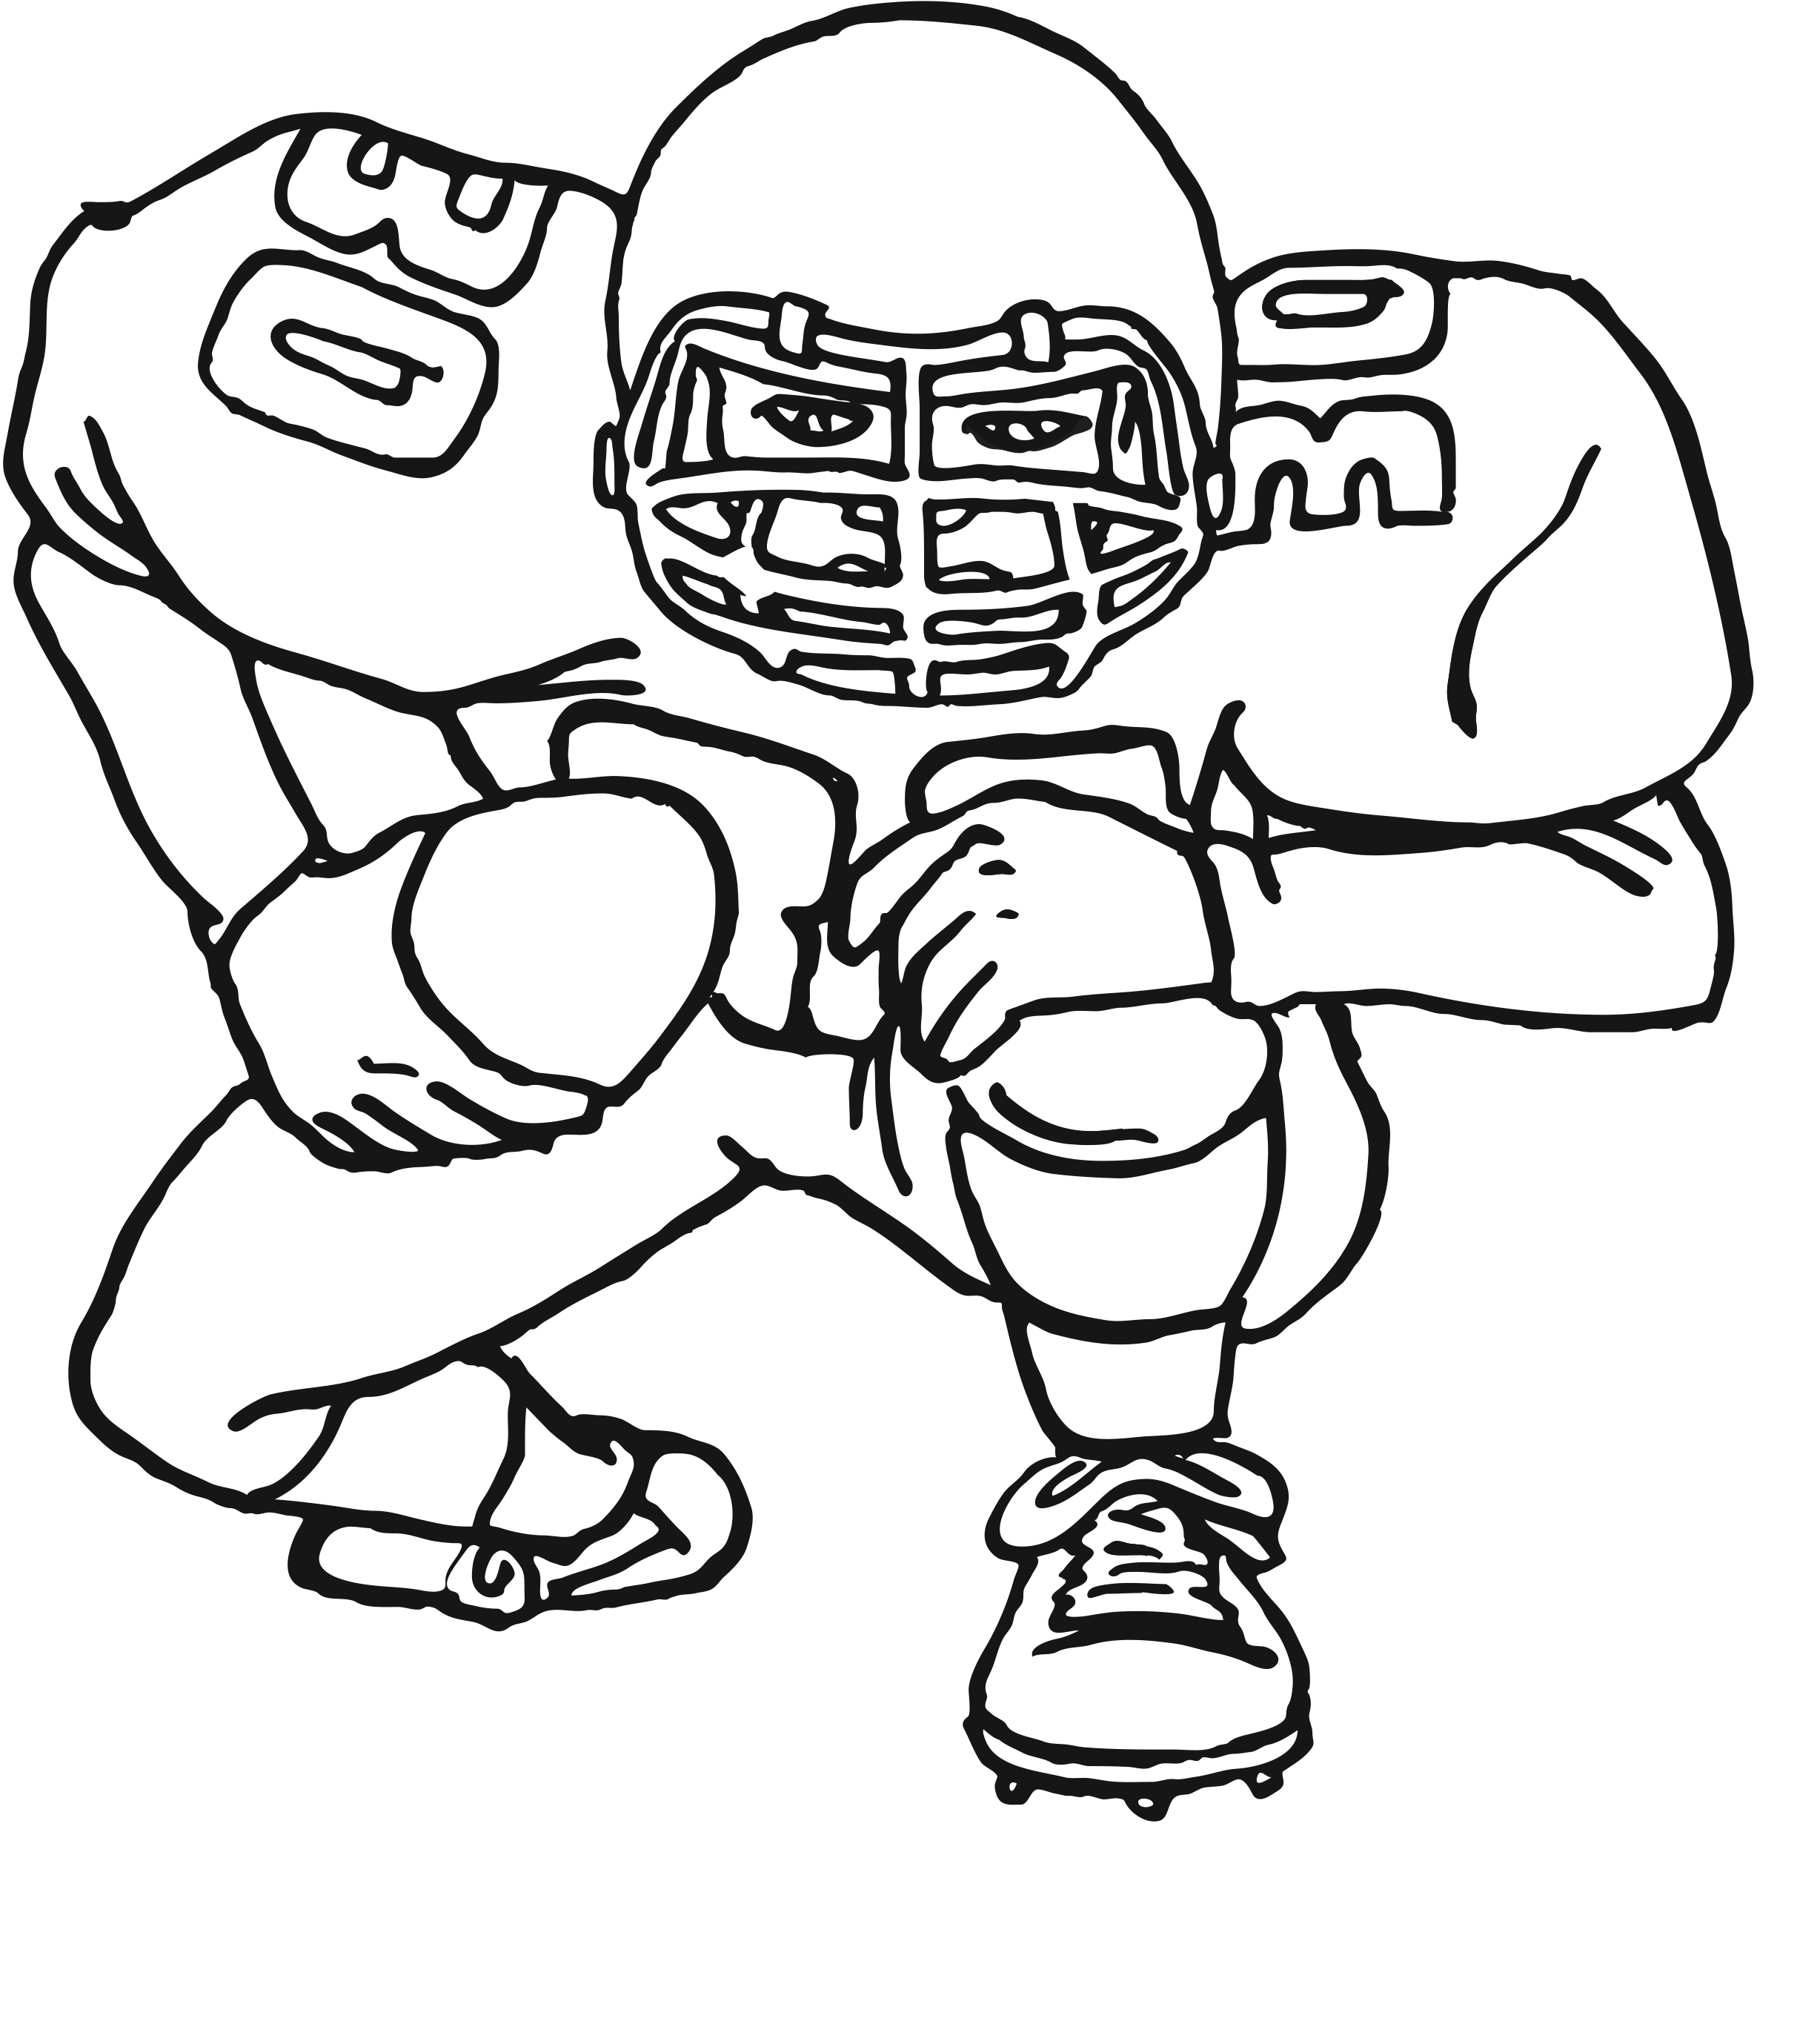 american football player coloring page